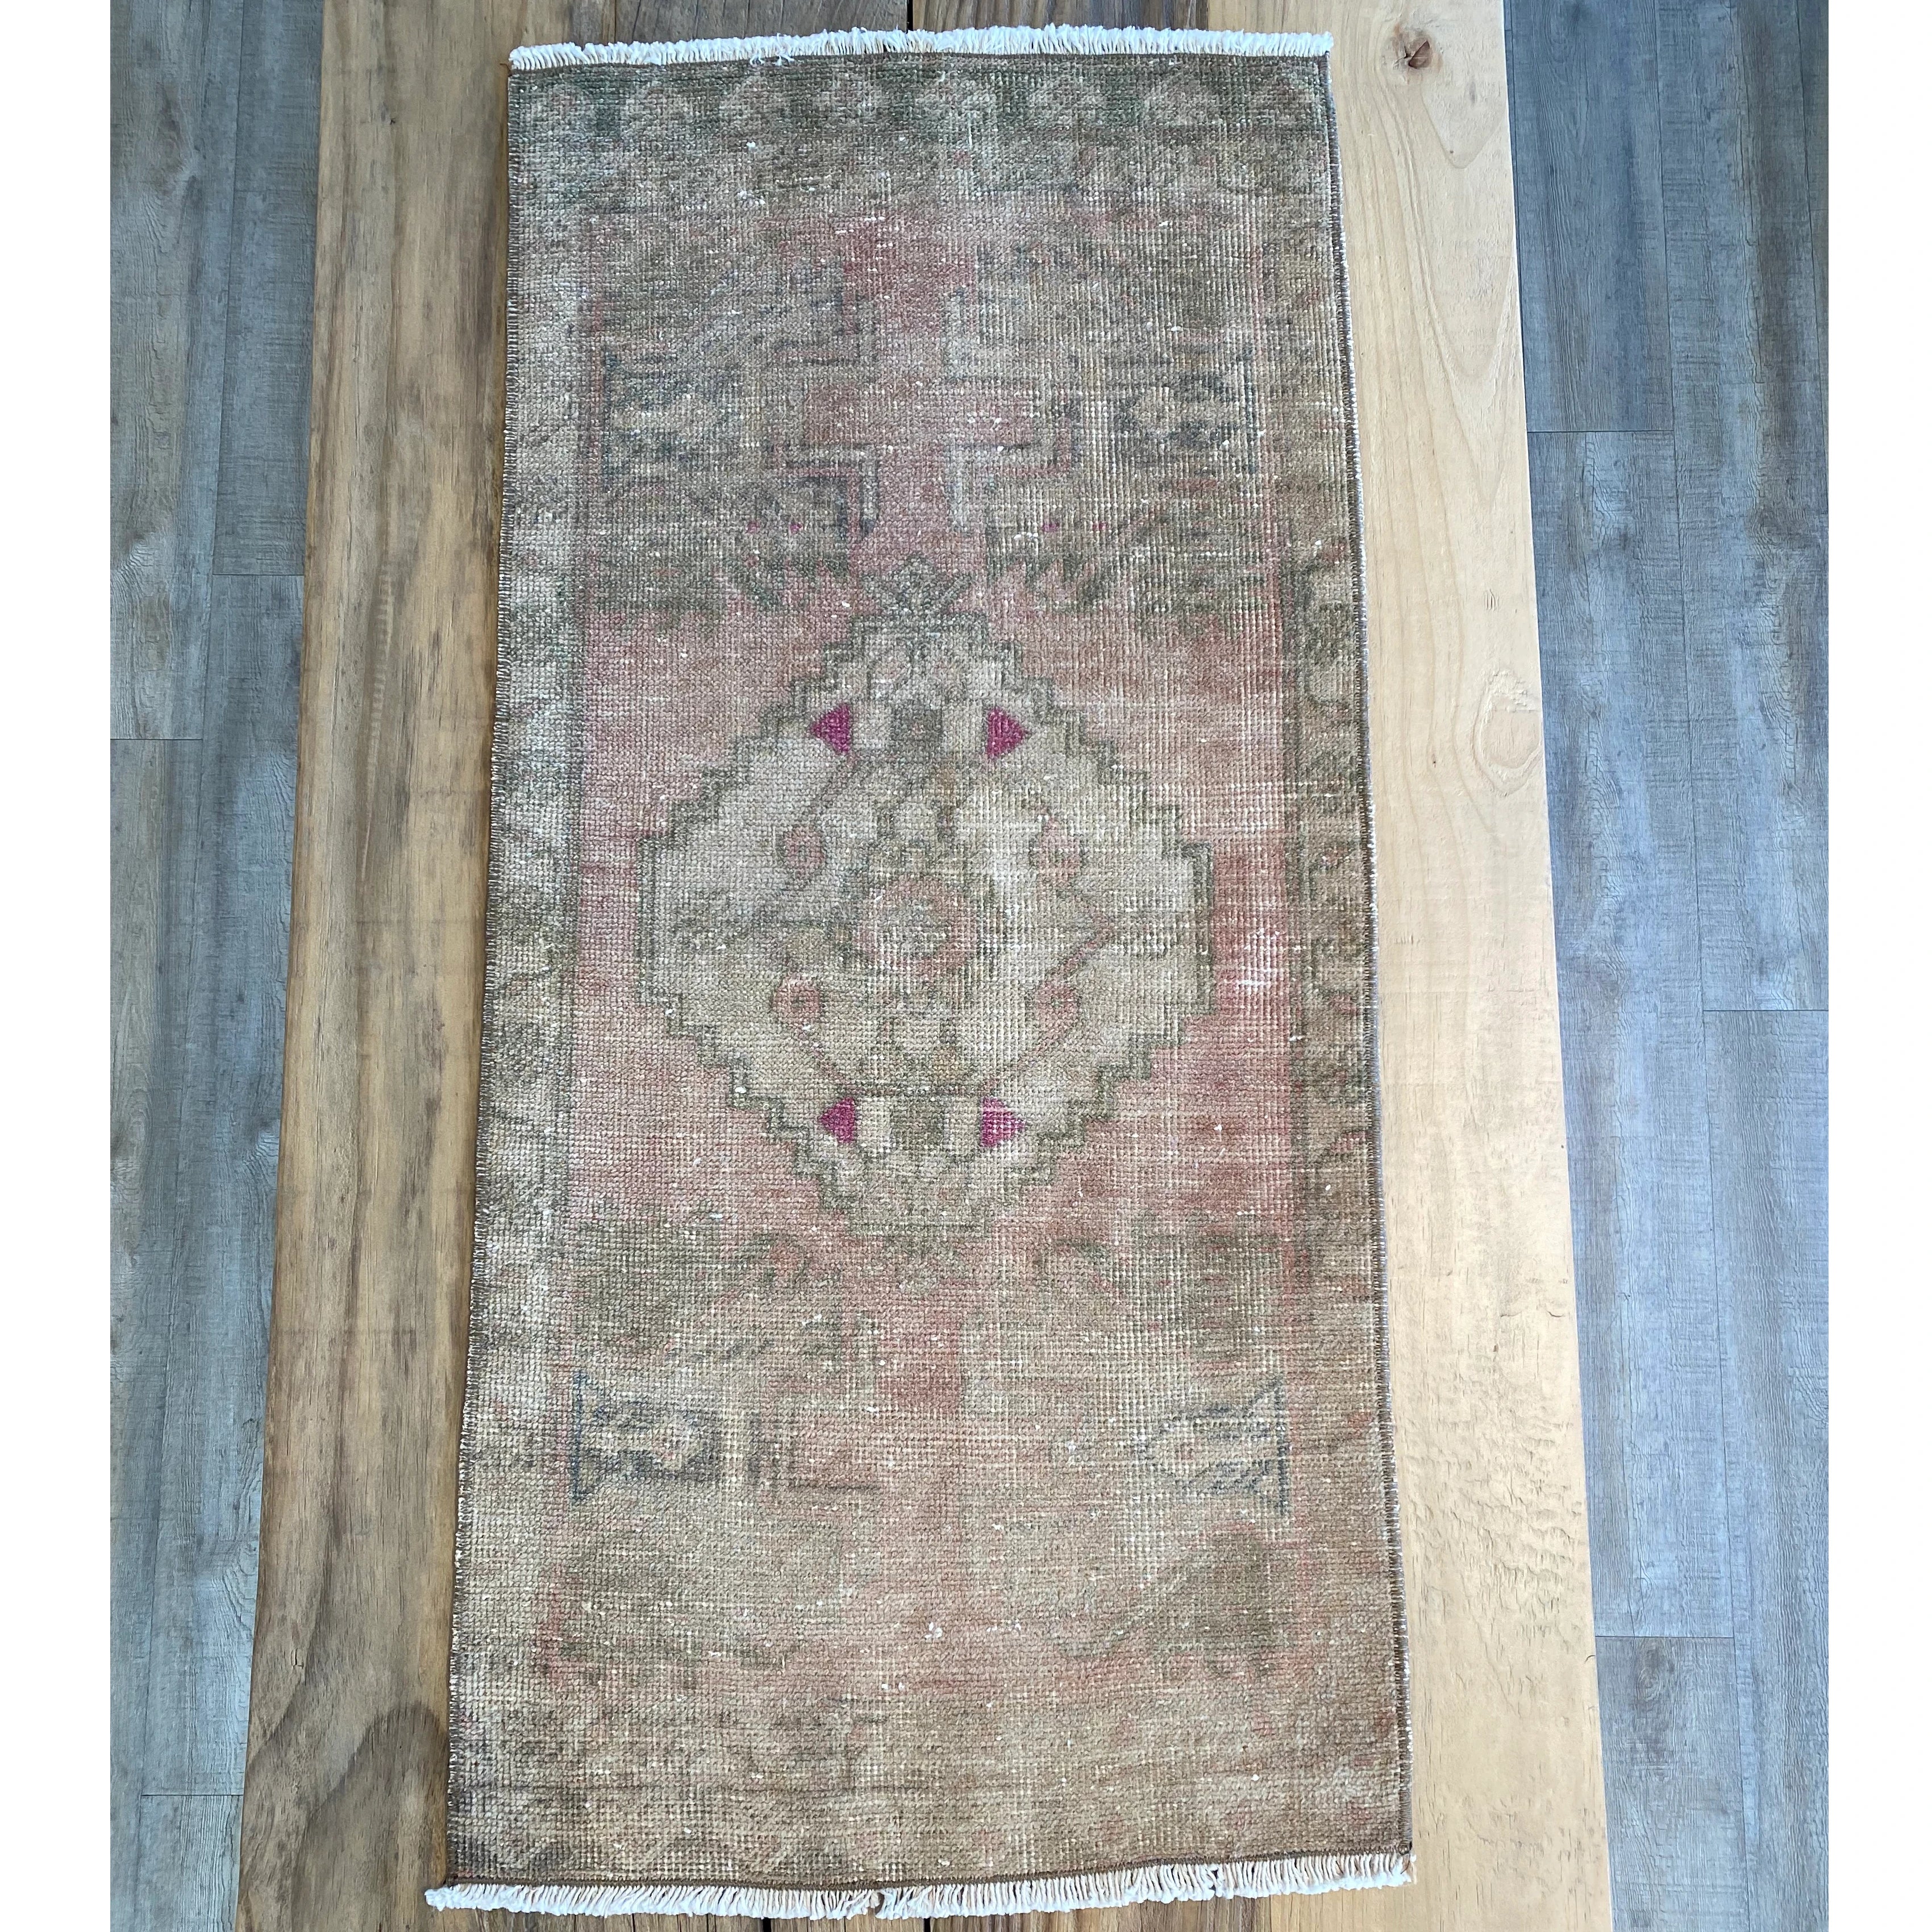 Turkish rug with Pale green, pale pink and beige with hints of hot pink